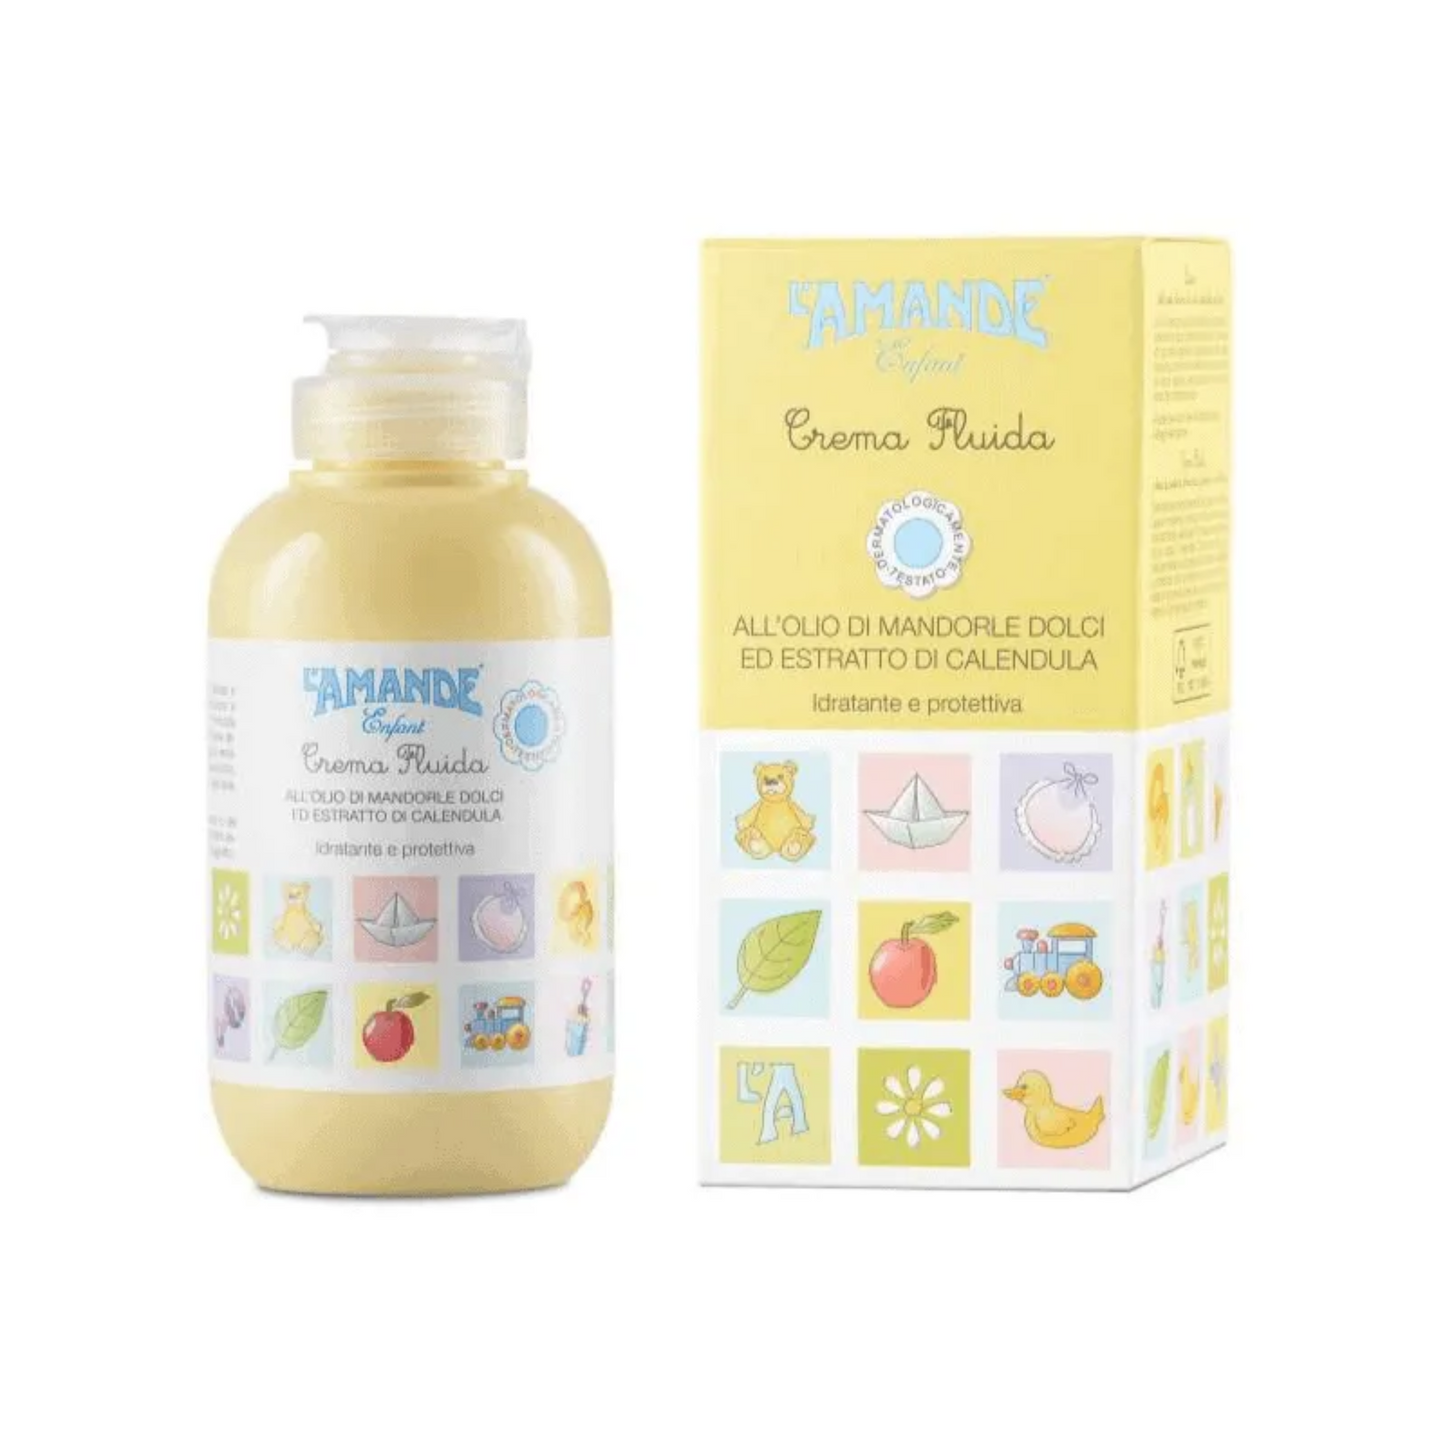 Primary Image of L'amande Body Lotion for Infants (200 ml) 